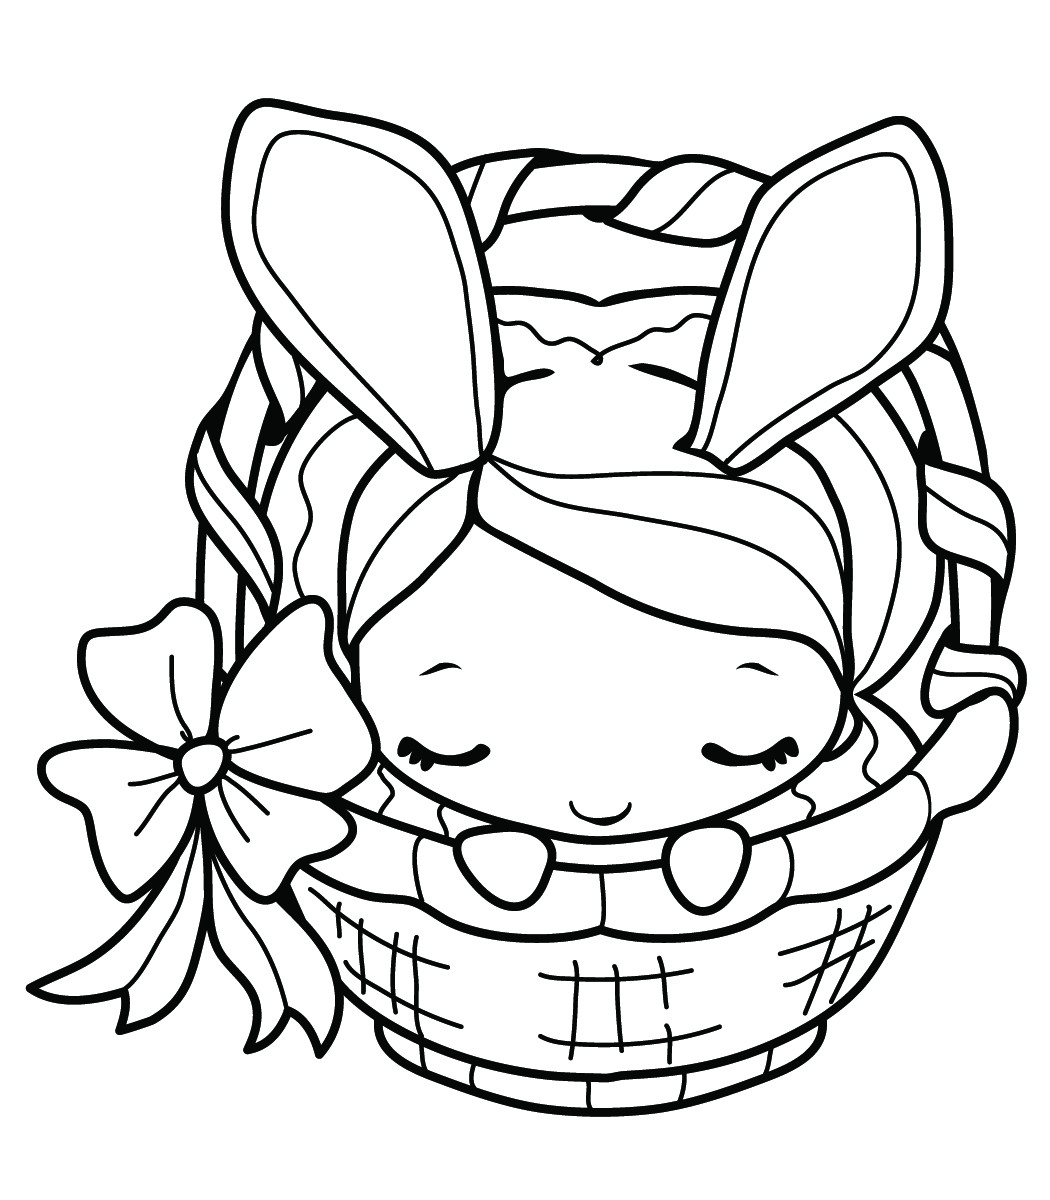 Easter Coloring Pages For Girls
 EASTER COLOURING BUNNY GIRL COLORING PAGE